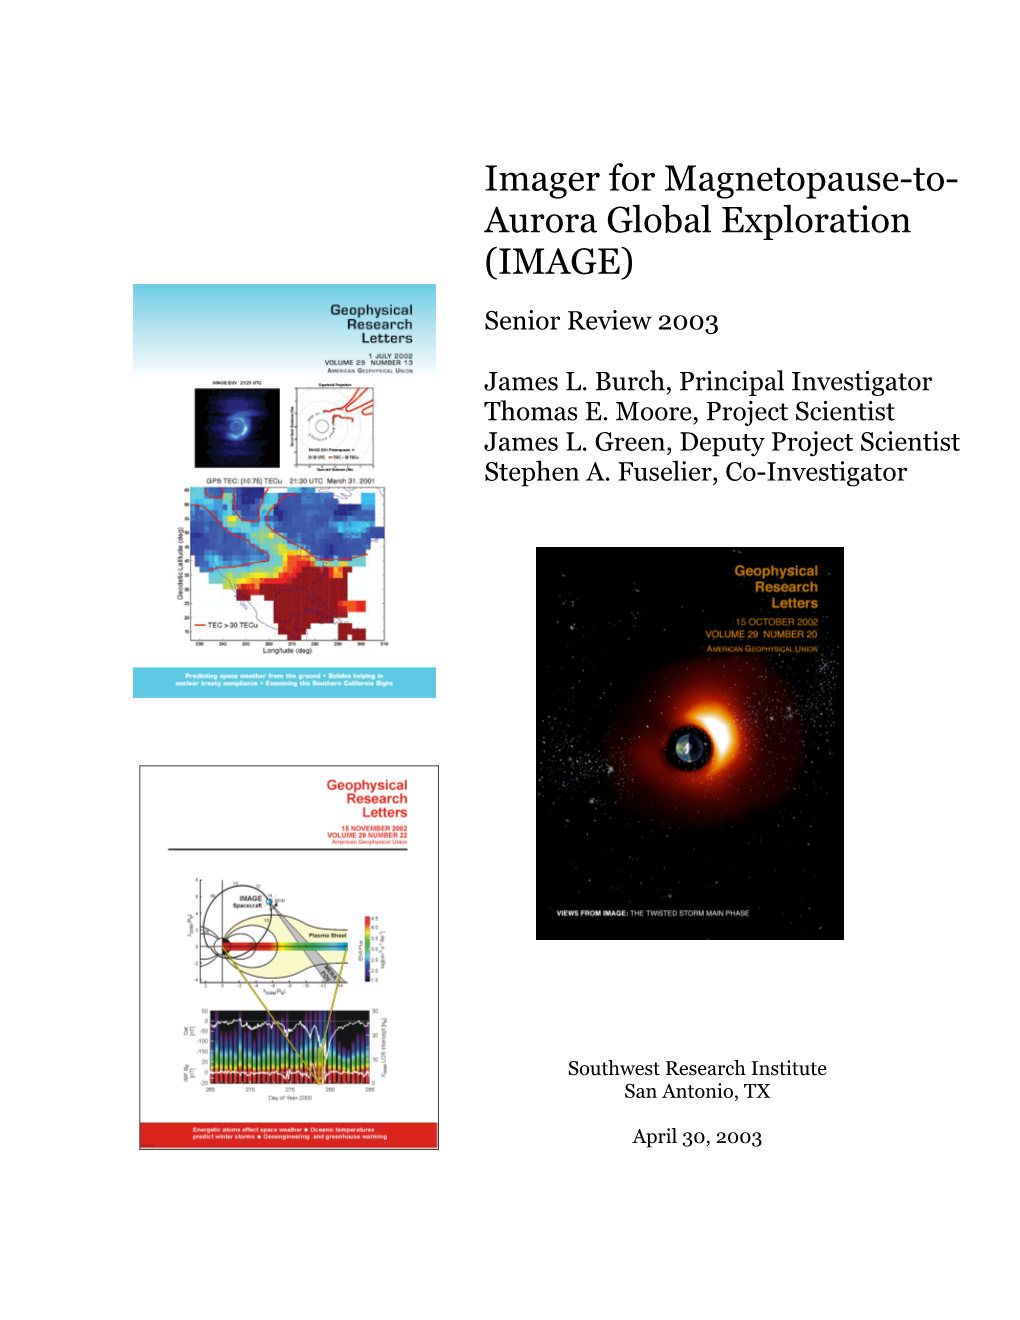 Imager for Magnetopause-To- Aurora Global Exploration (IMAGE)